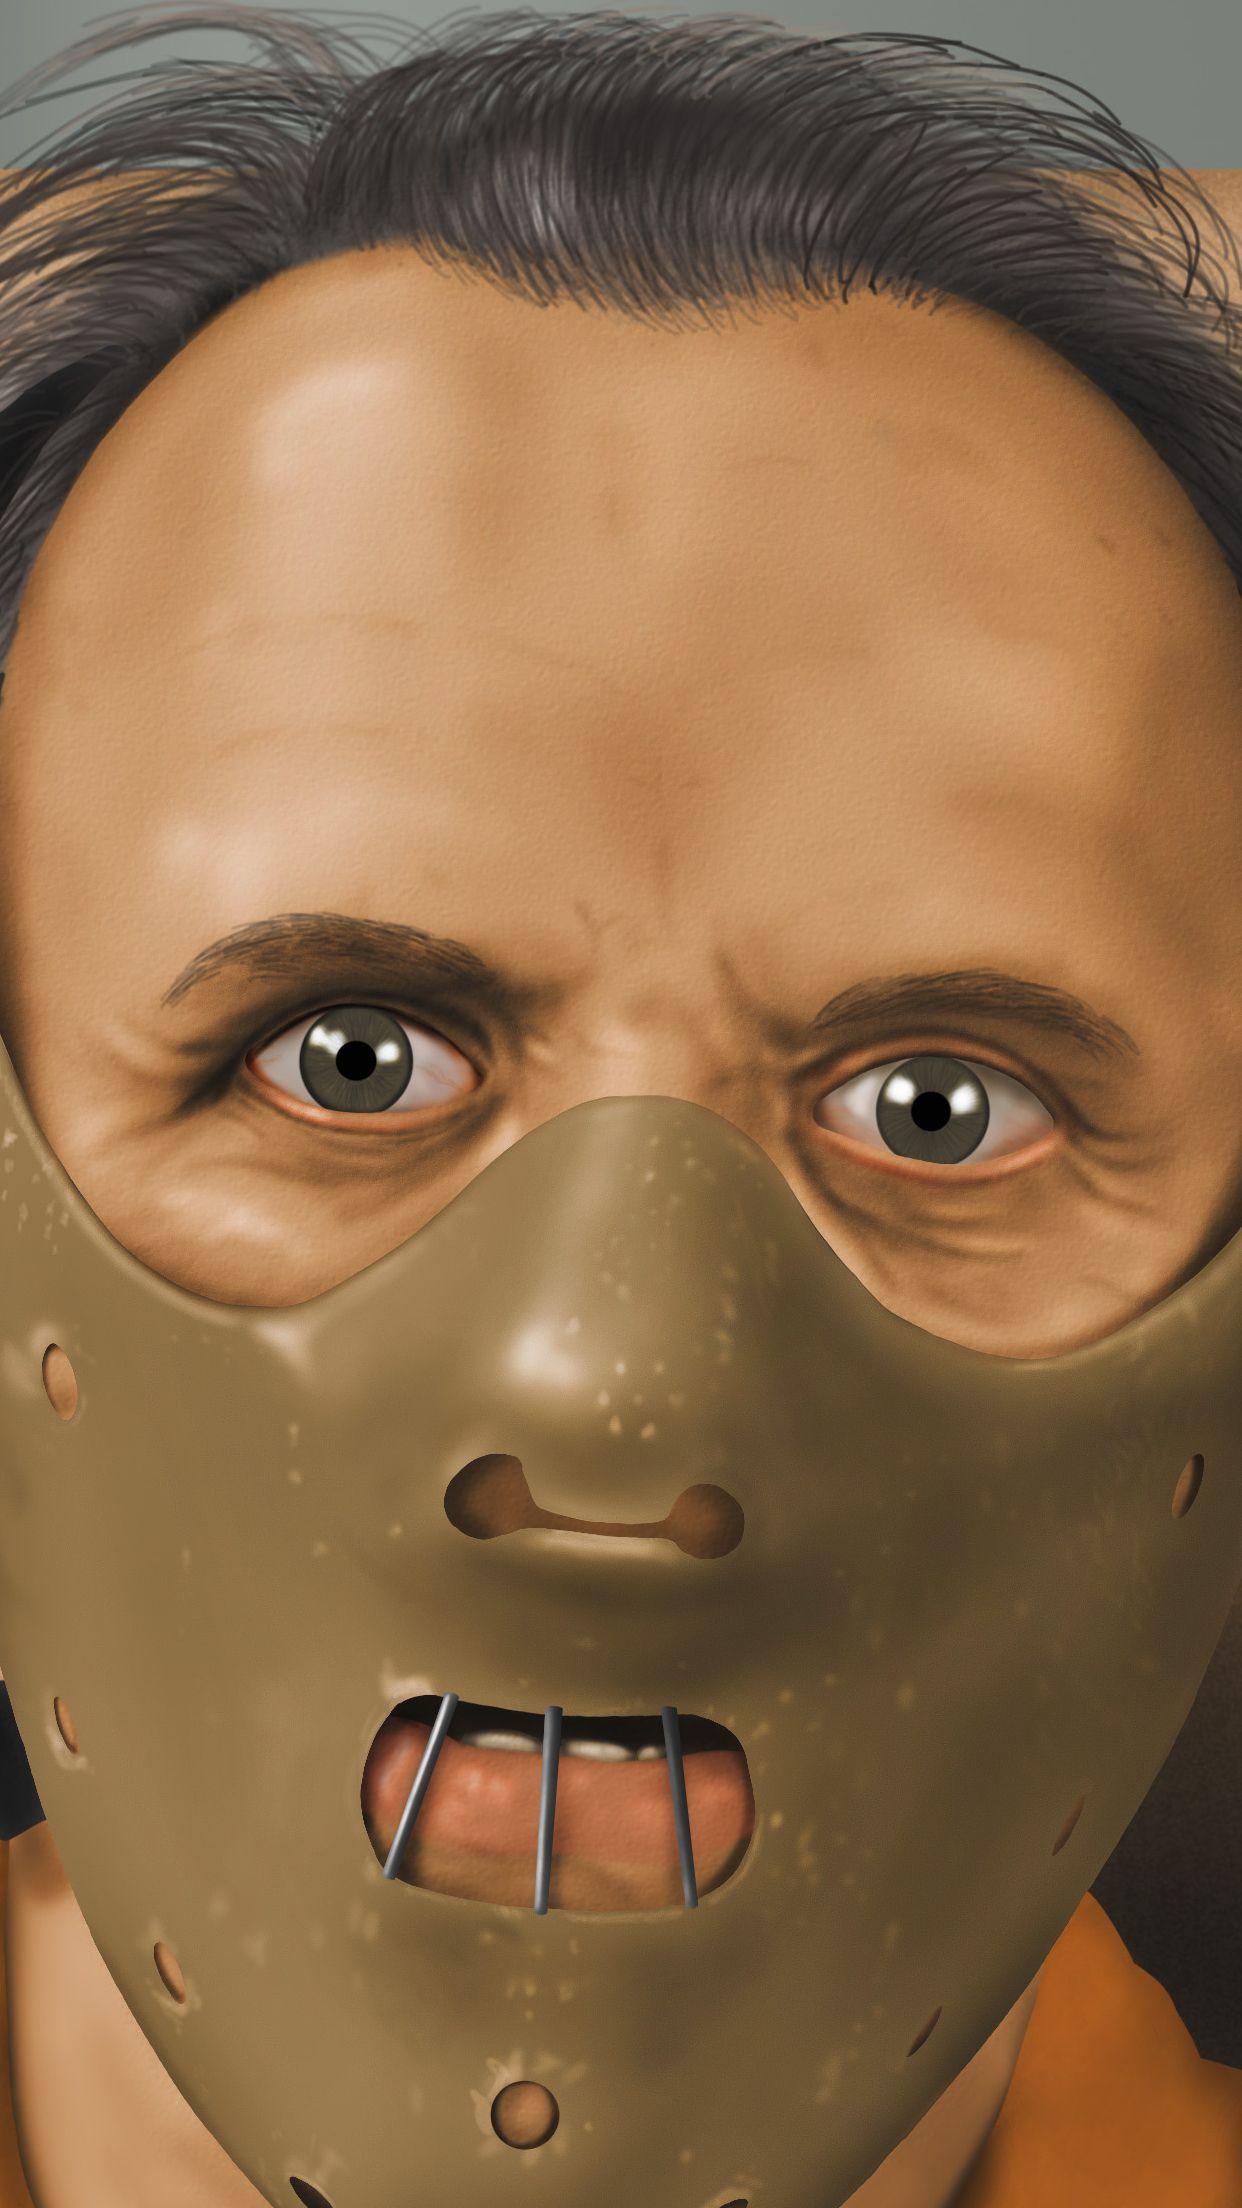 Hannibal Lecter 2 Wallpaper for iPhone X, 6